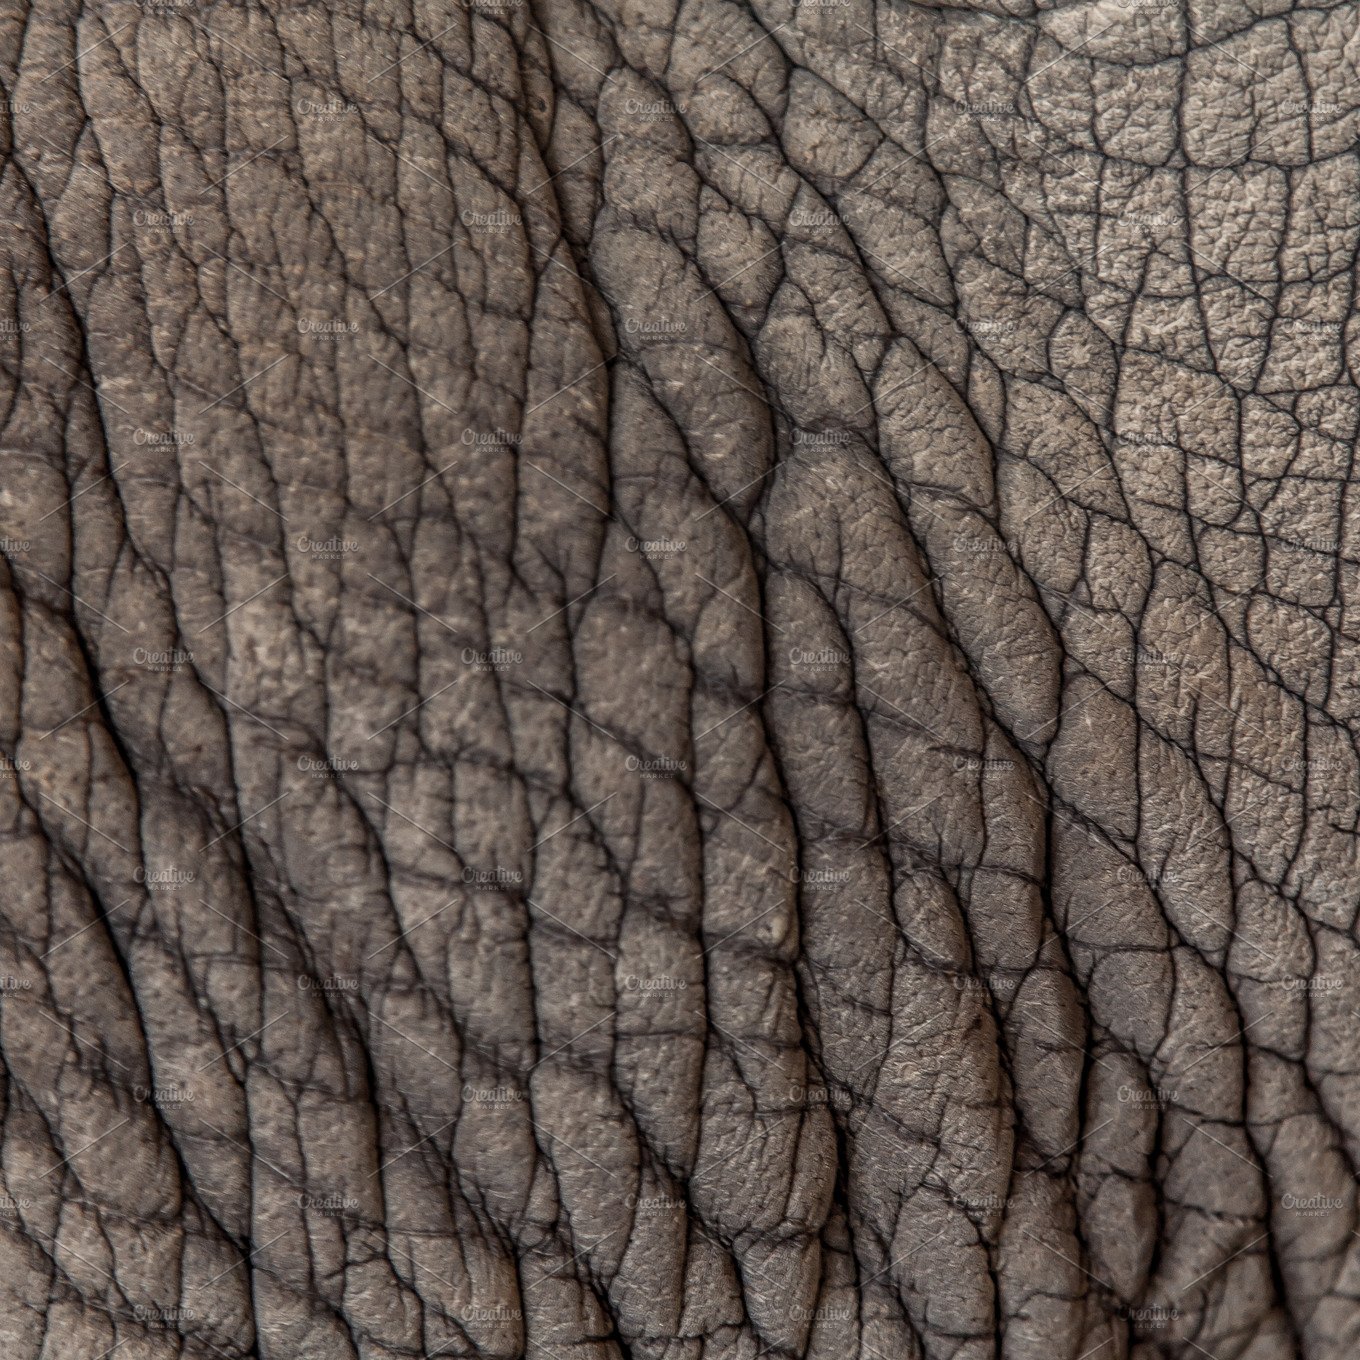 Elephant leather pattern cover image.